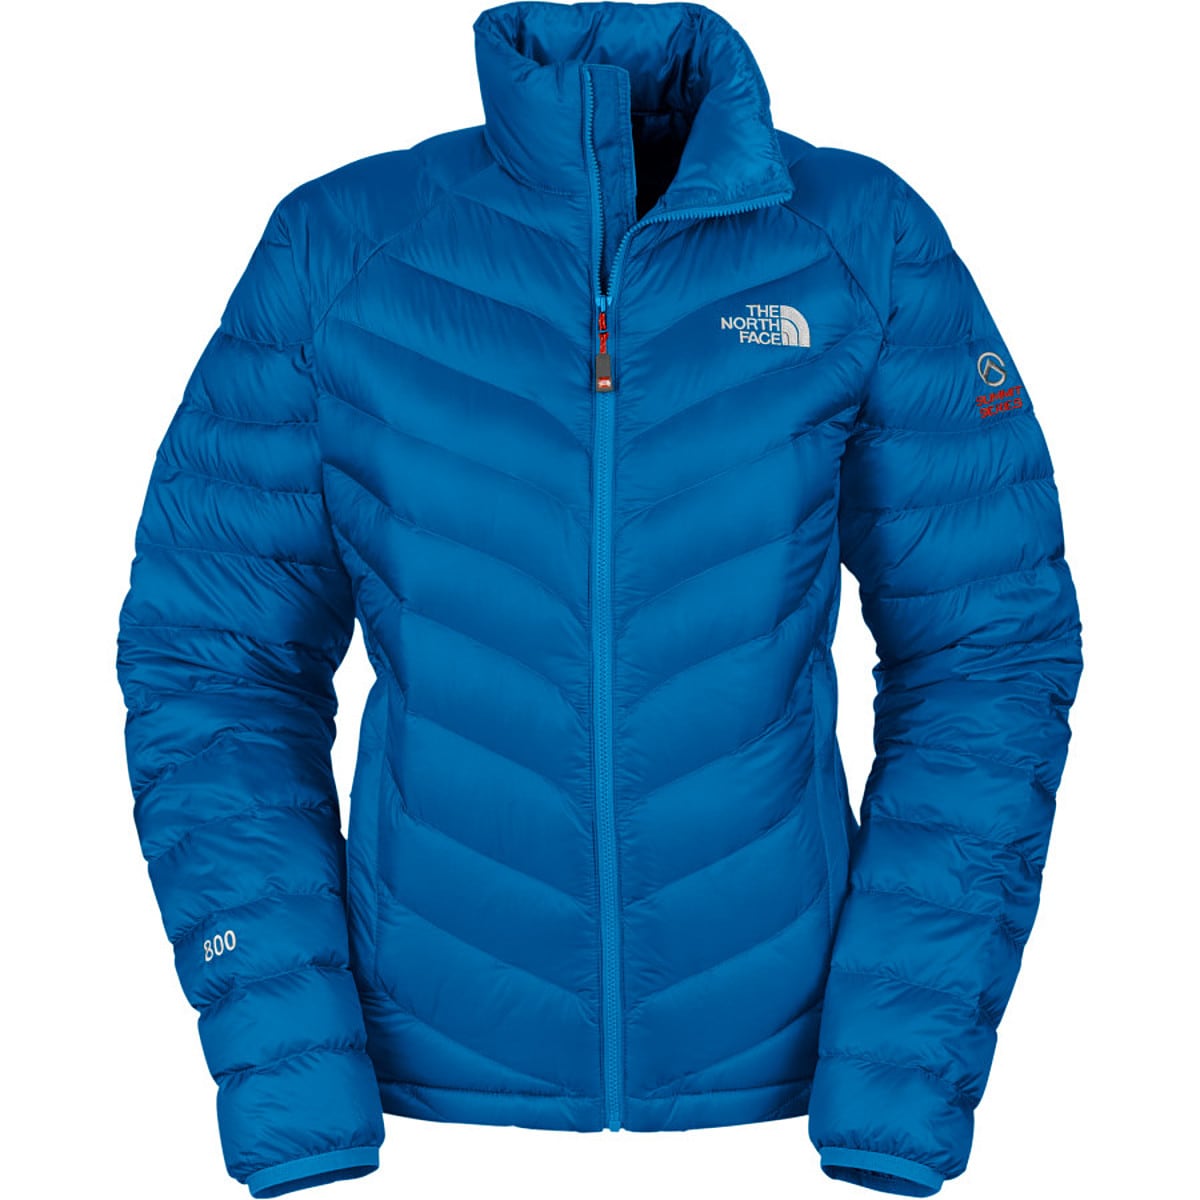 The North Face Thunder Down Jacket - Women's - Clothing